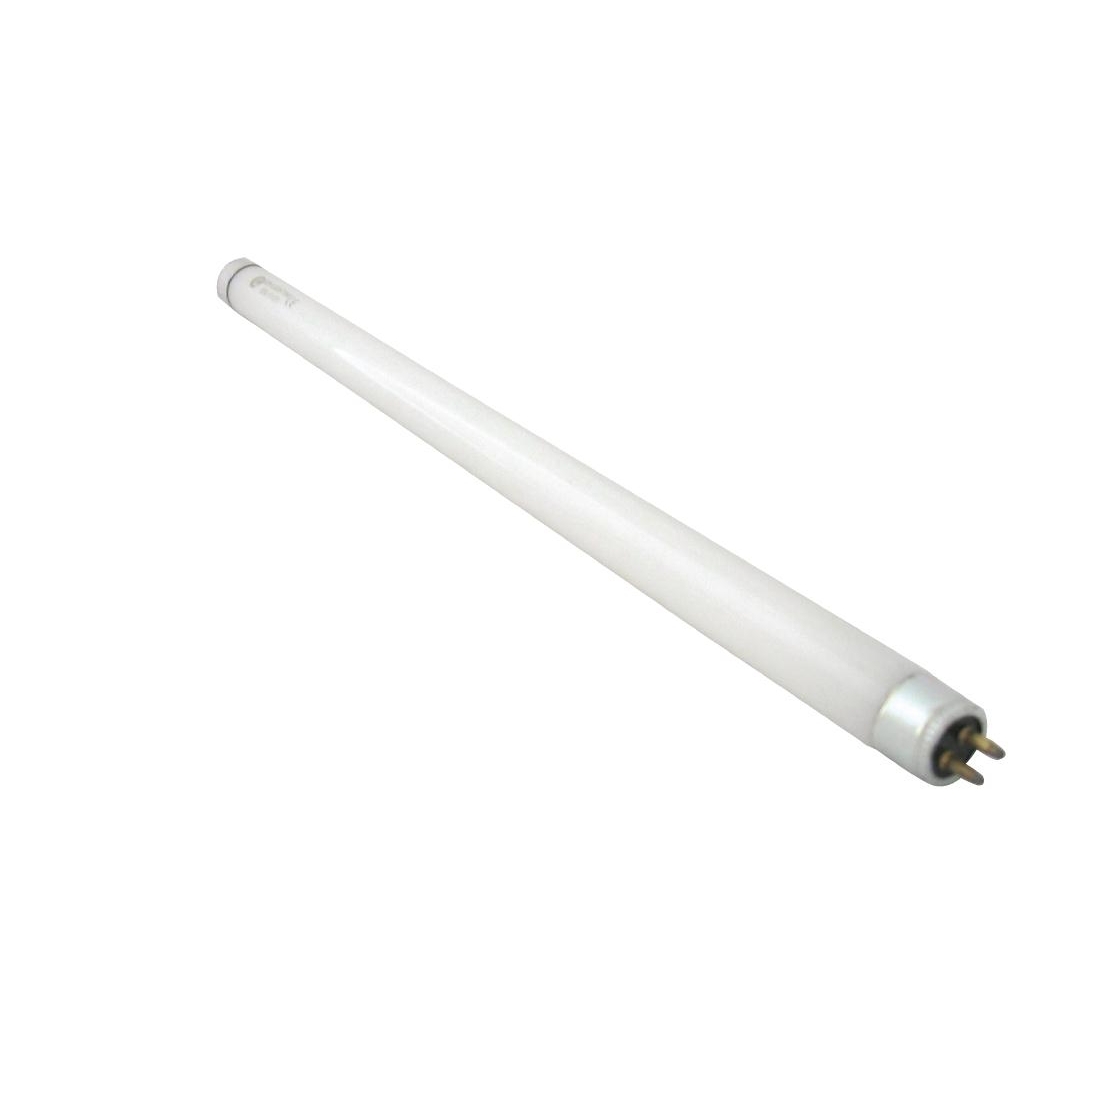 Replacement 8W Fluorescent Tube for Eazyzap Fly Killers